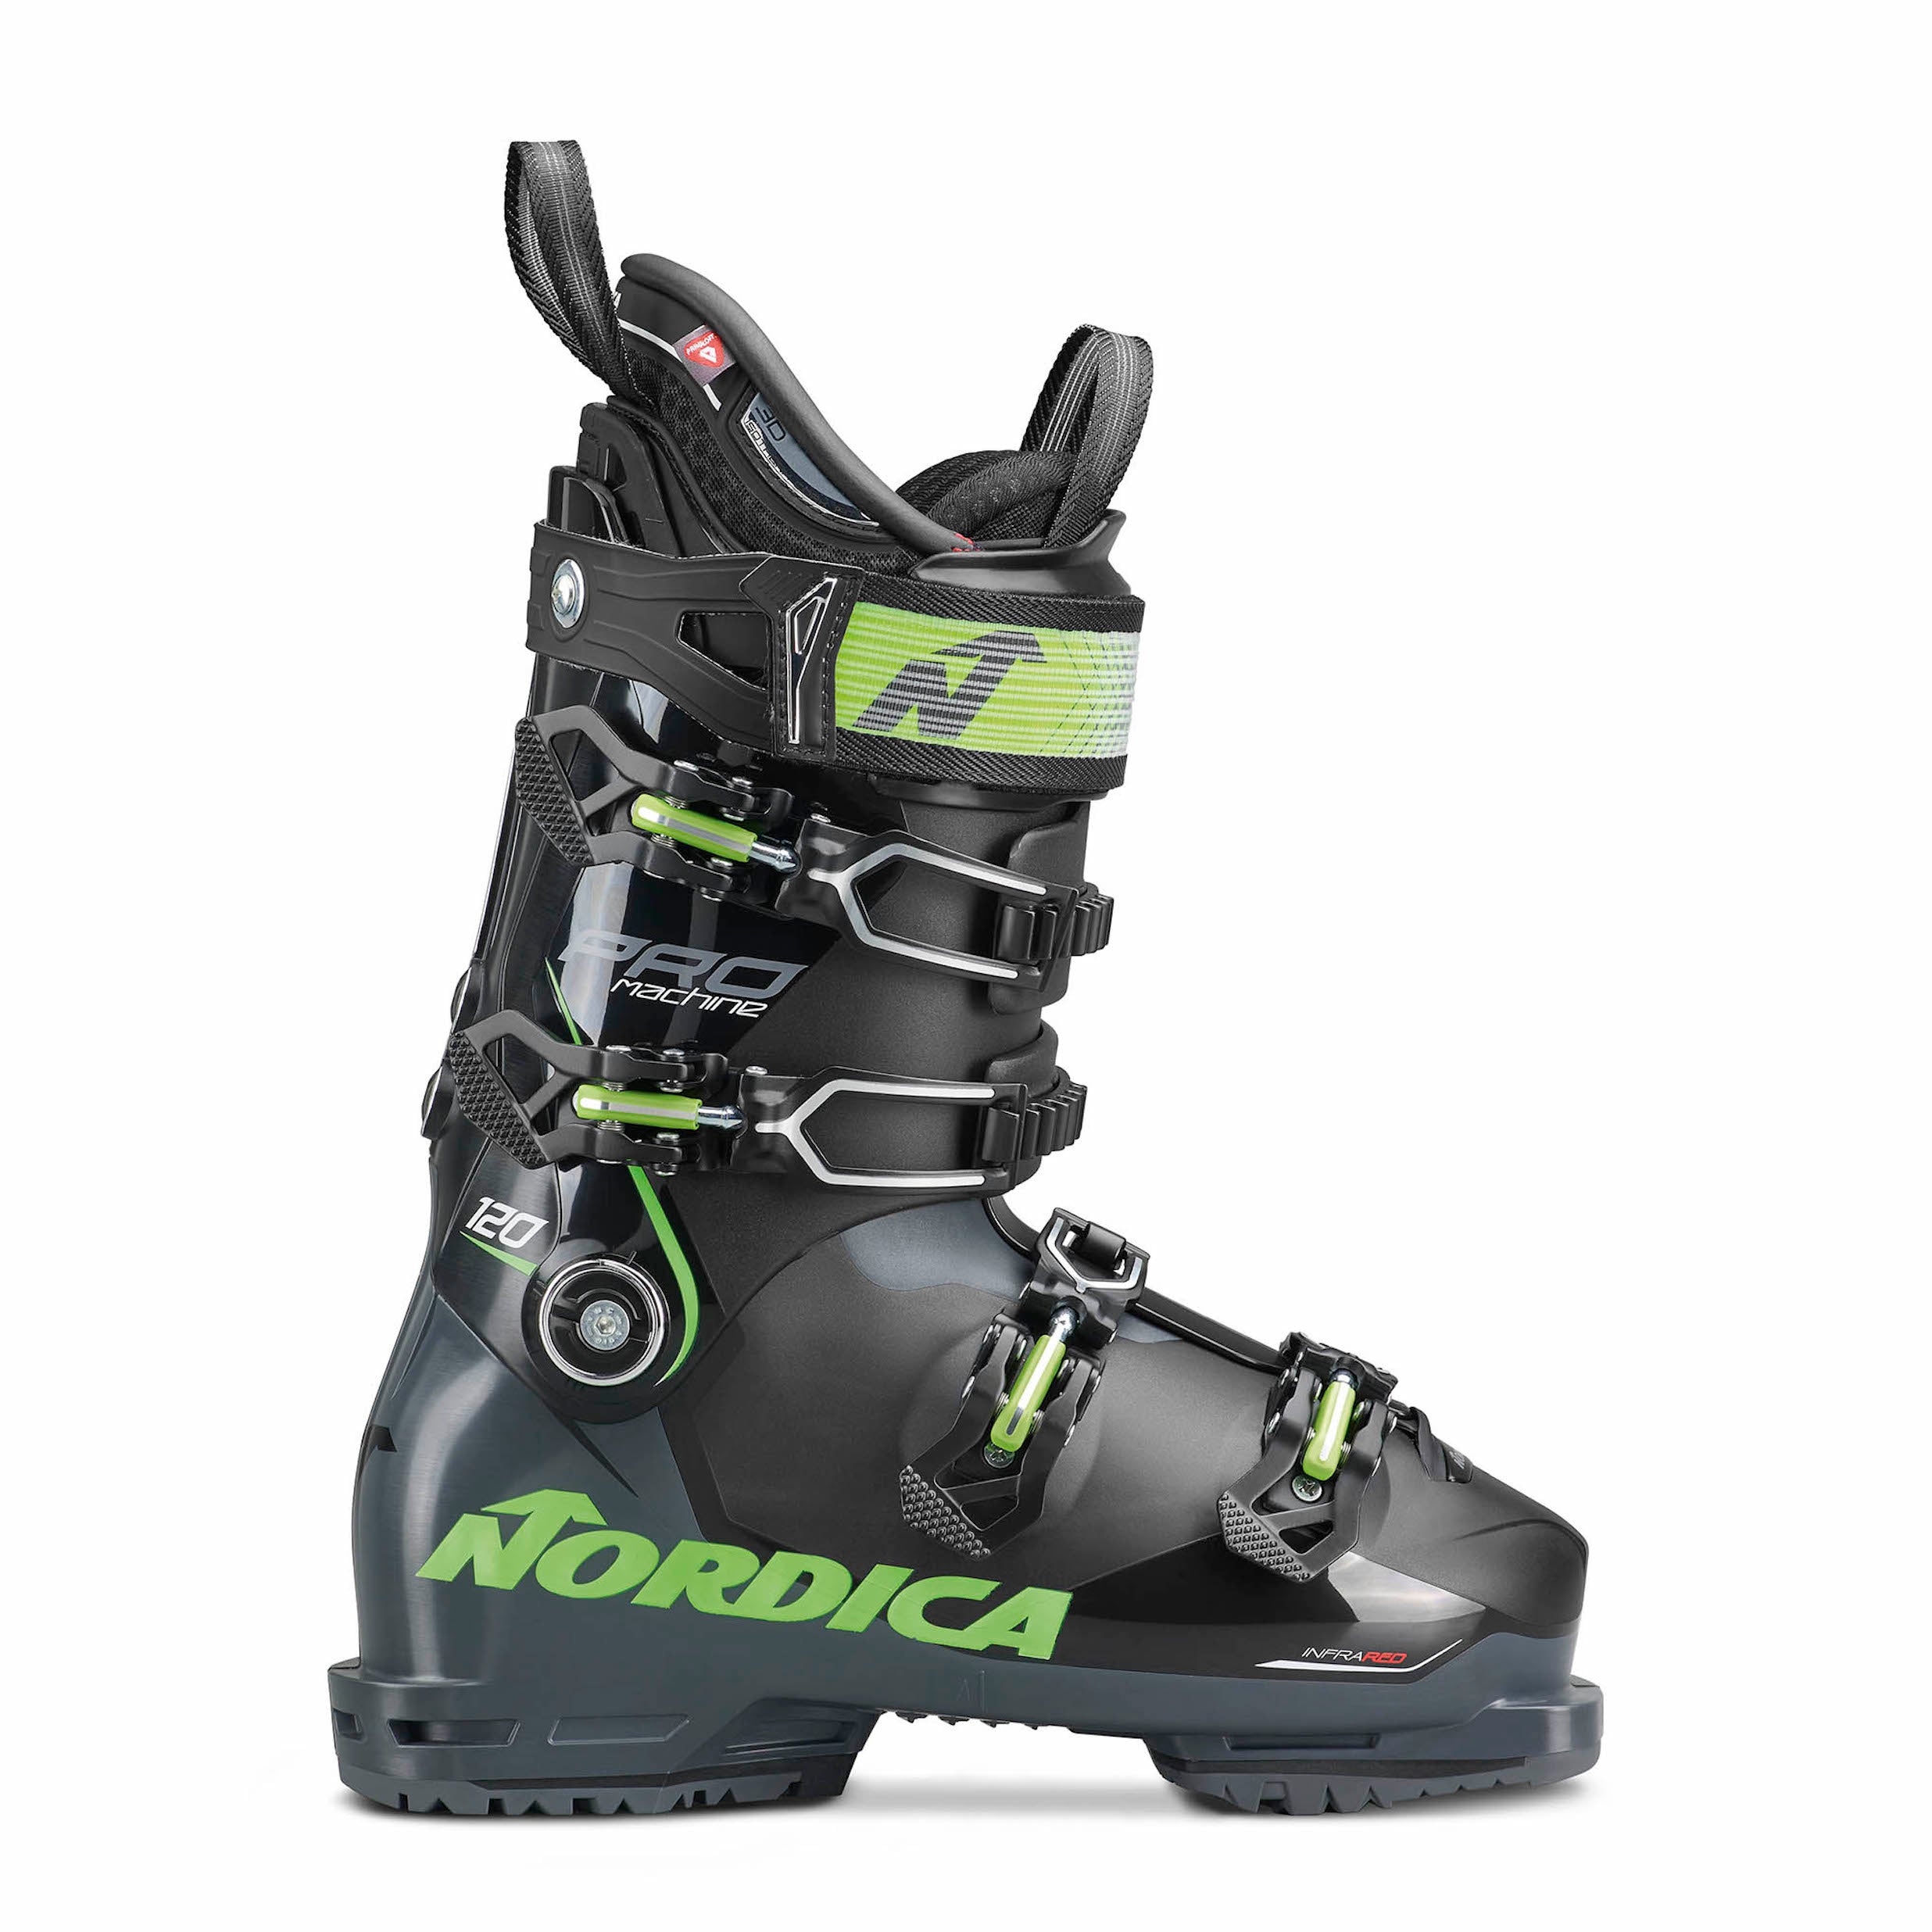 Men's Nordica Promachine 120 ski boot, black and grey with green accents.